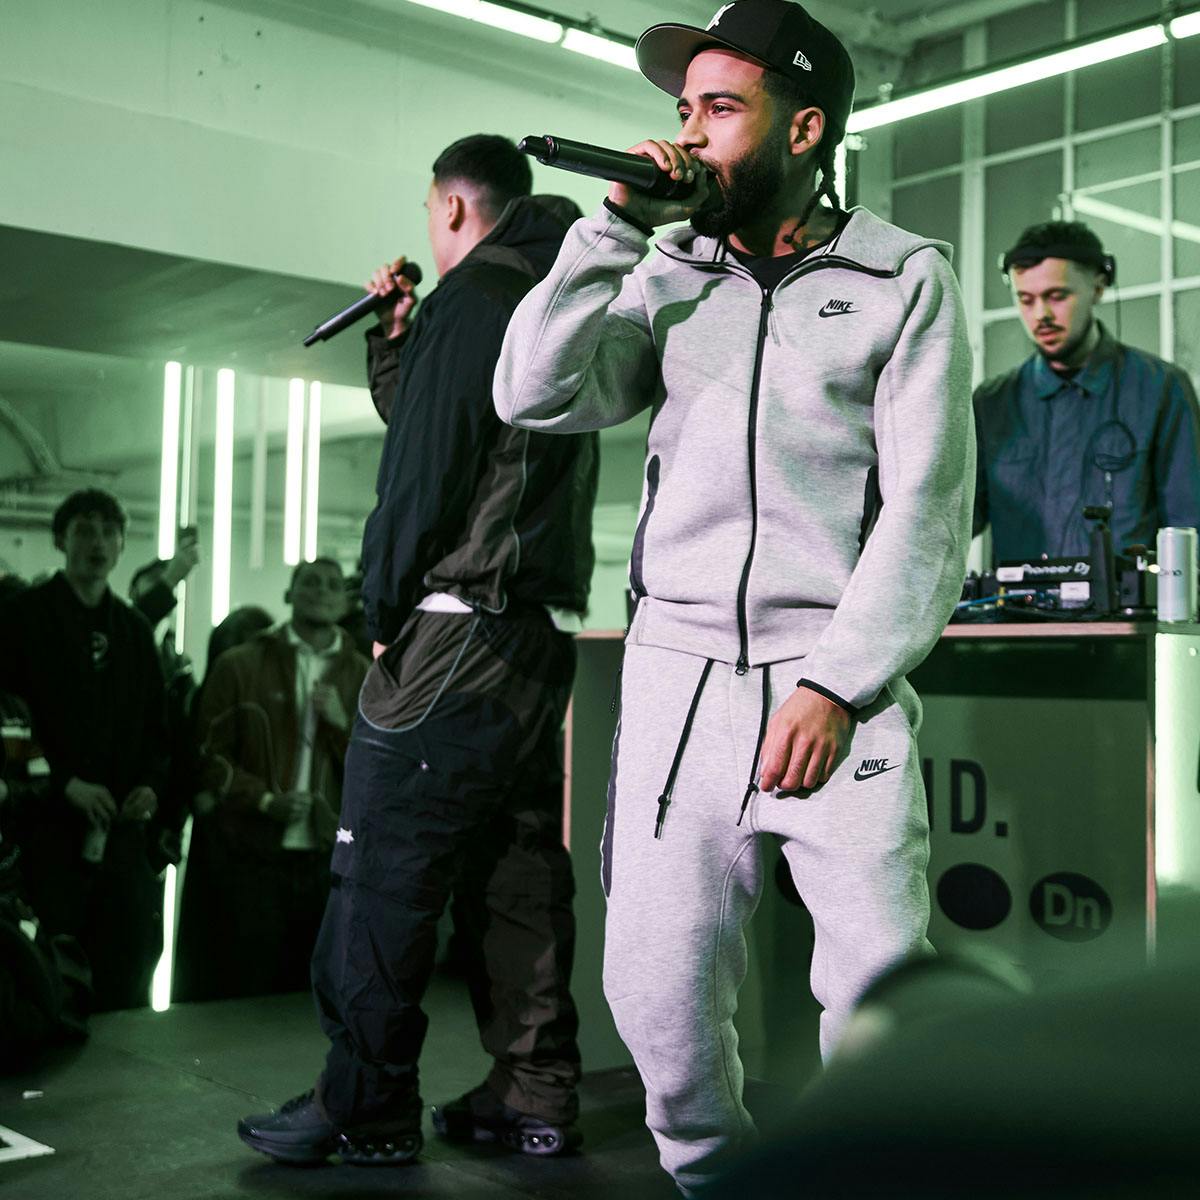 THE AIR MAX DN 2024 PRESENTED BY END. — EVENT RECAP